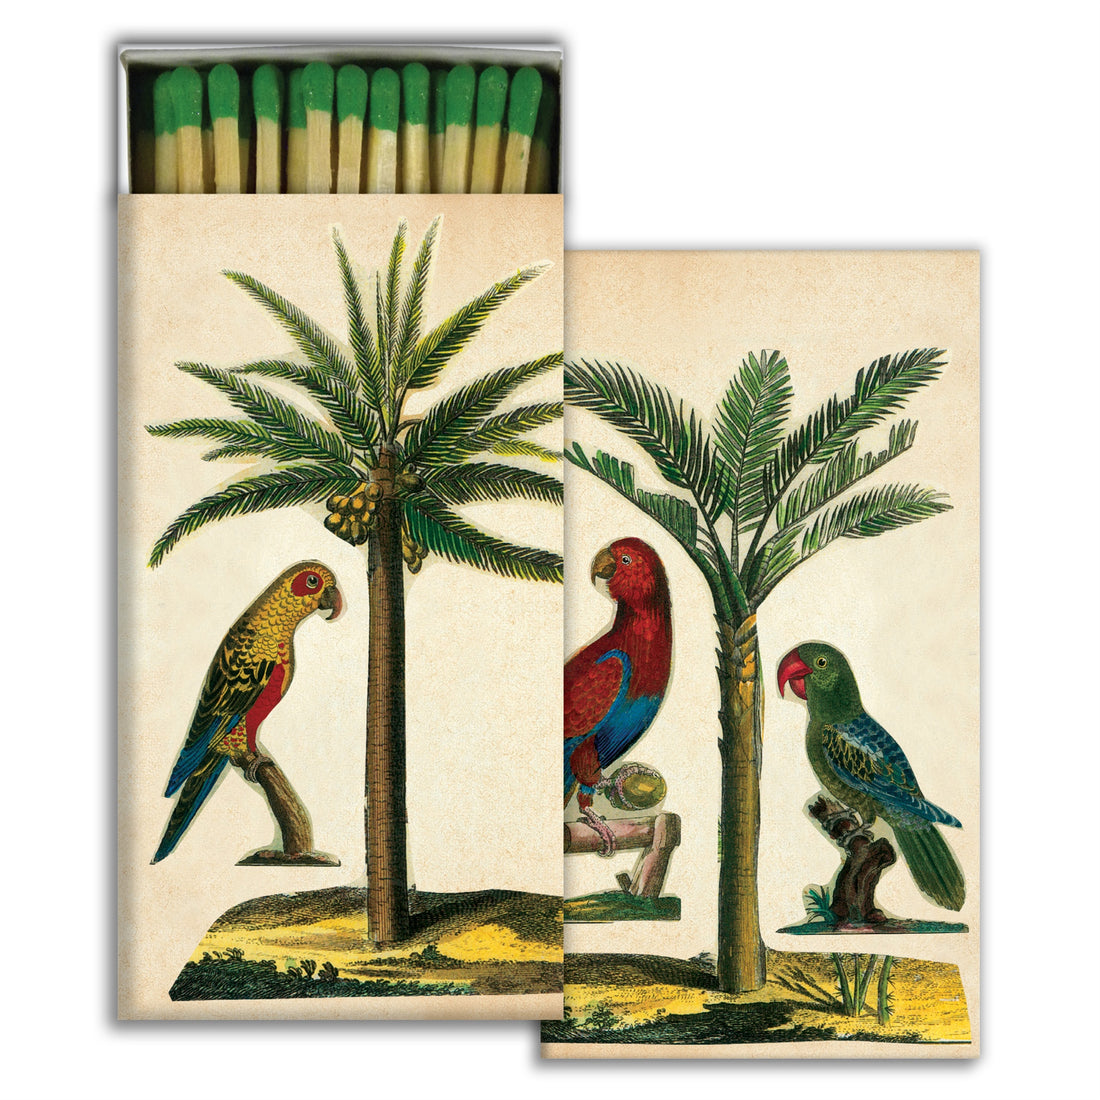 Illustrated HomArt Tropical Matches matchbox cover featuring tropical birds and palm trees.